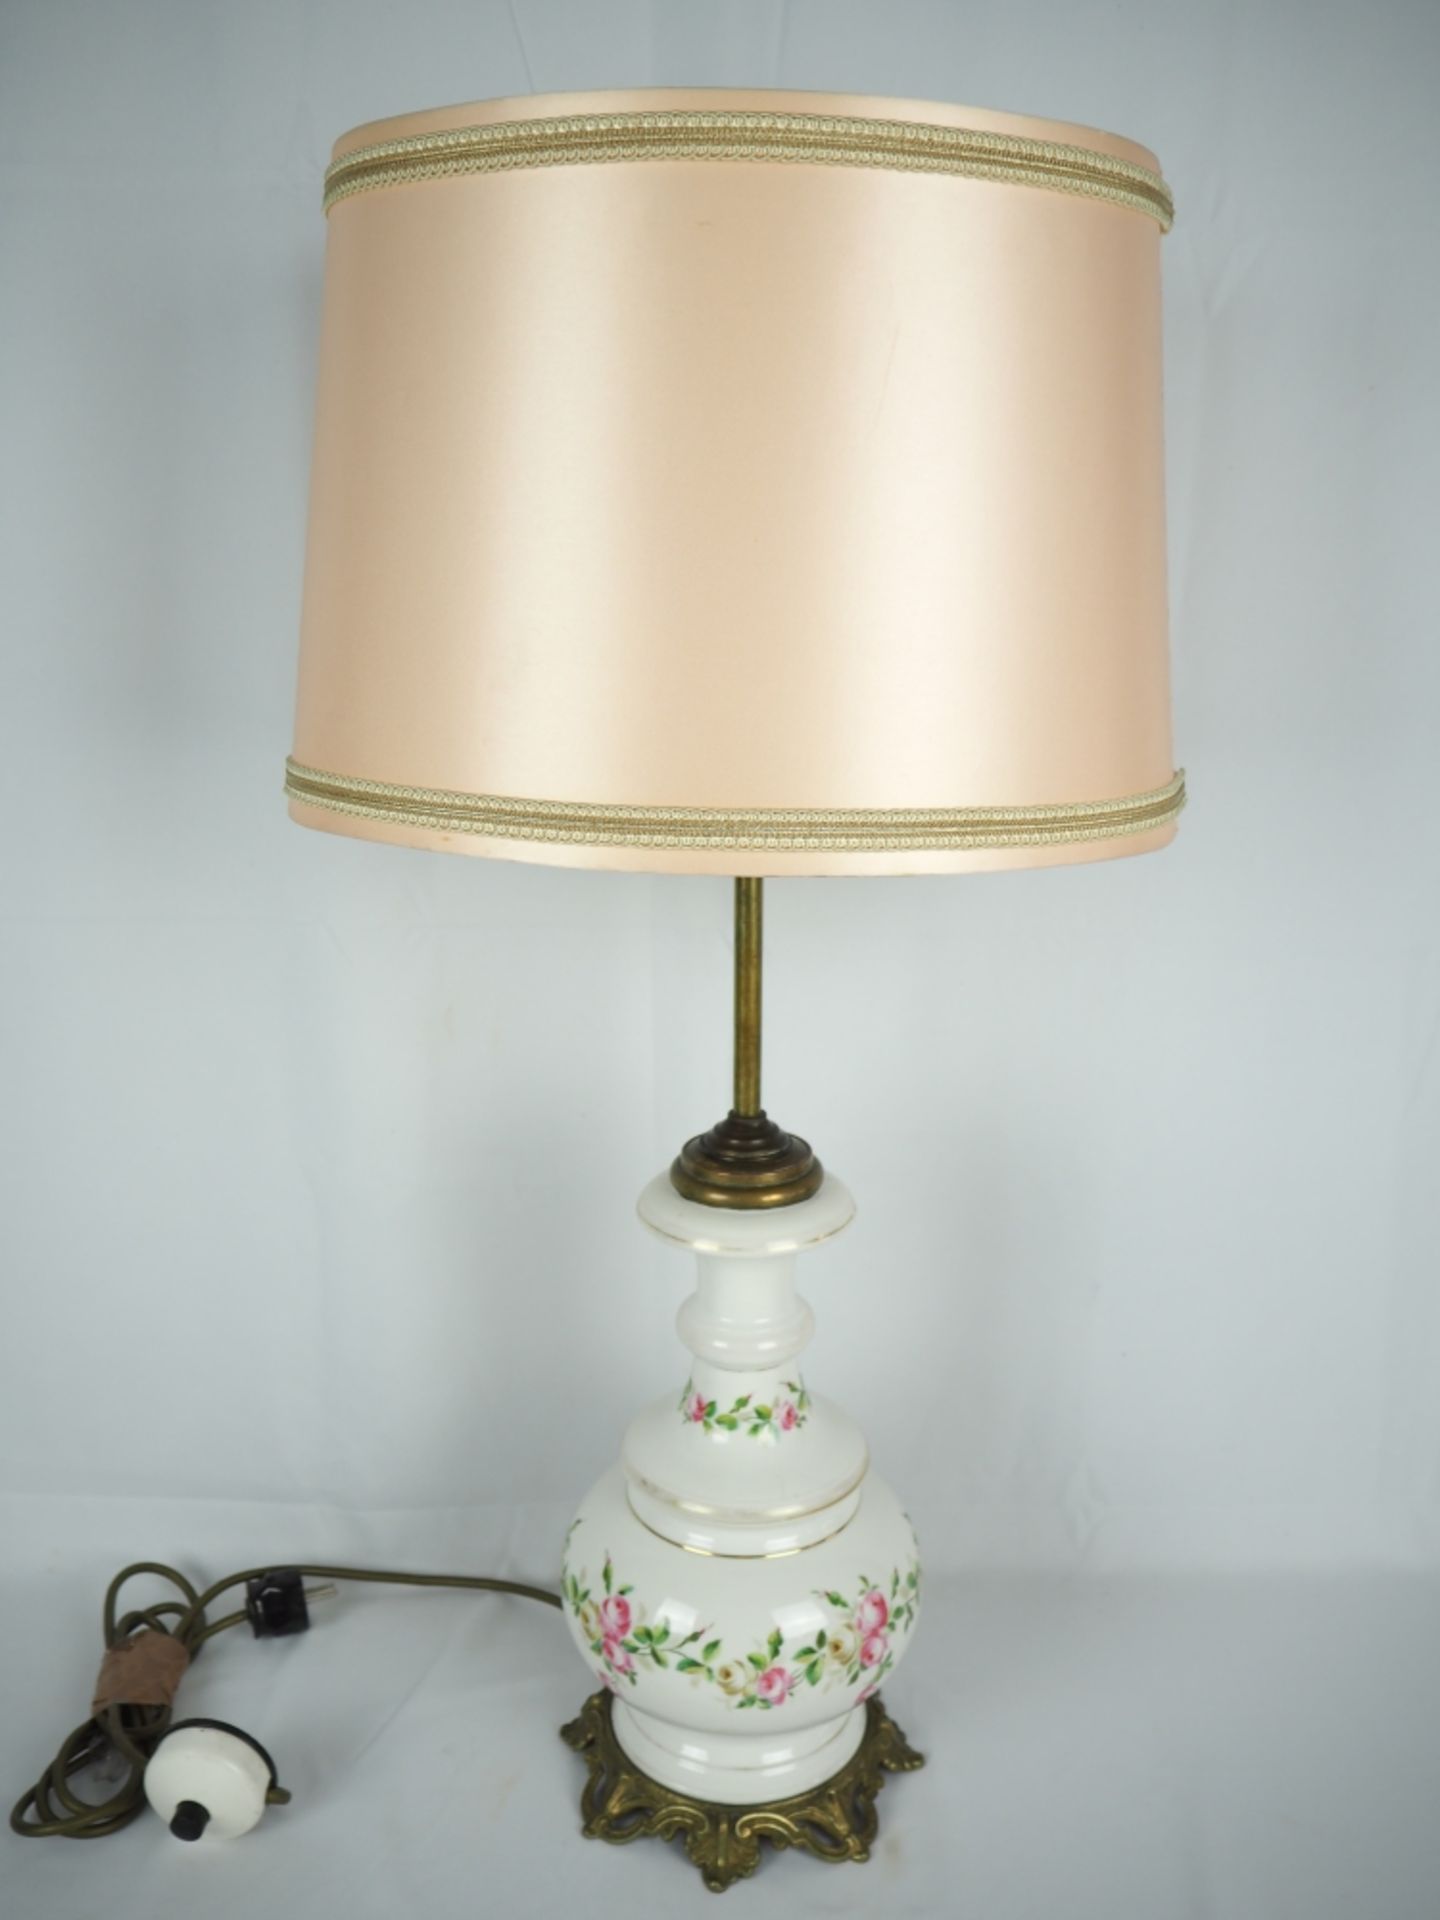 Big porcelain table lamp around 1930, probably Rosenthal